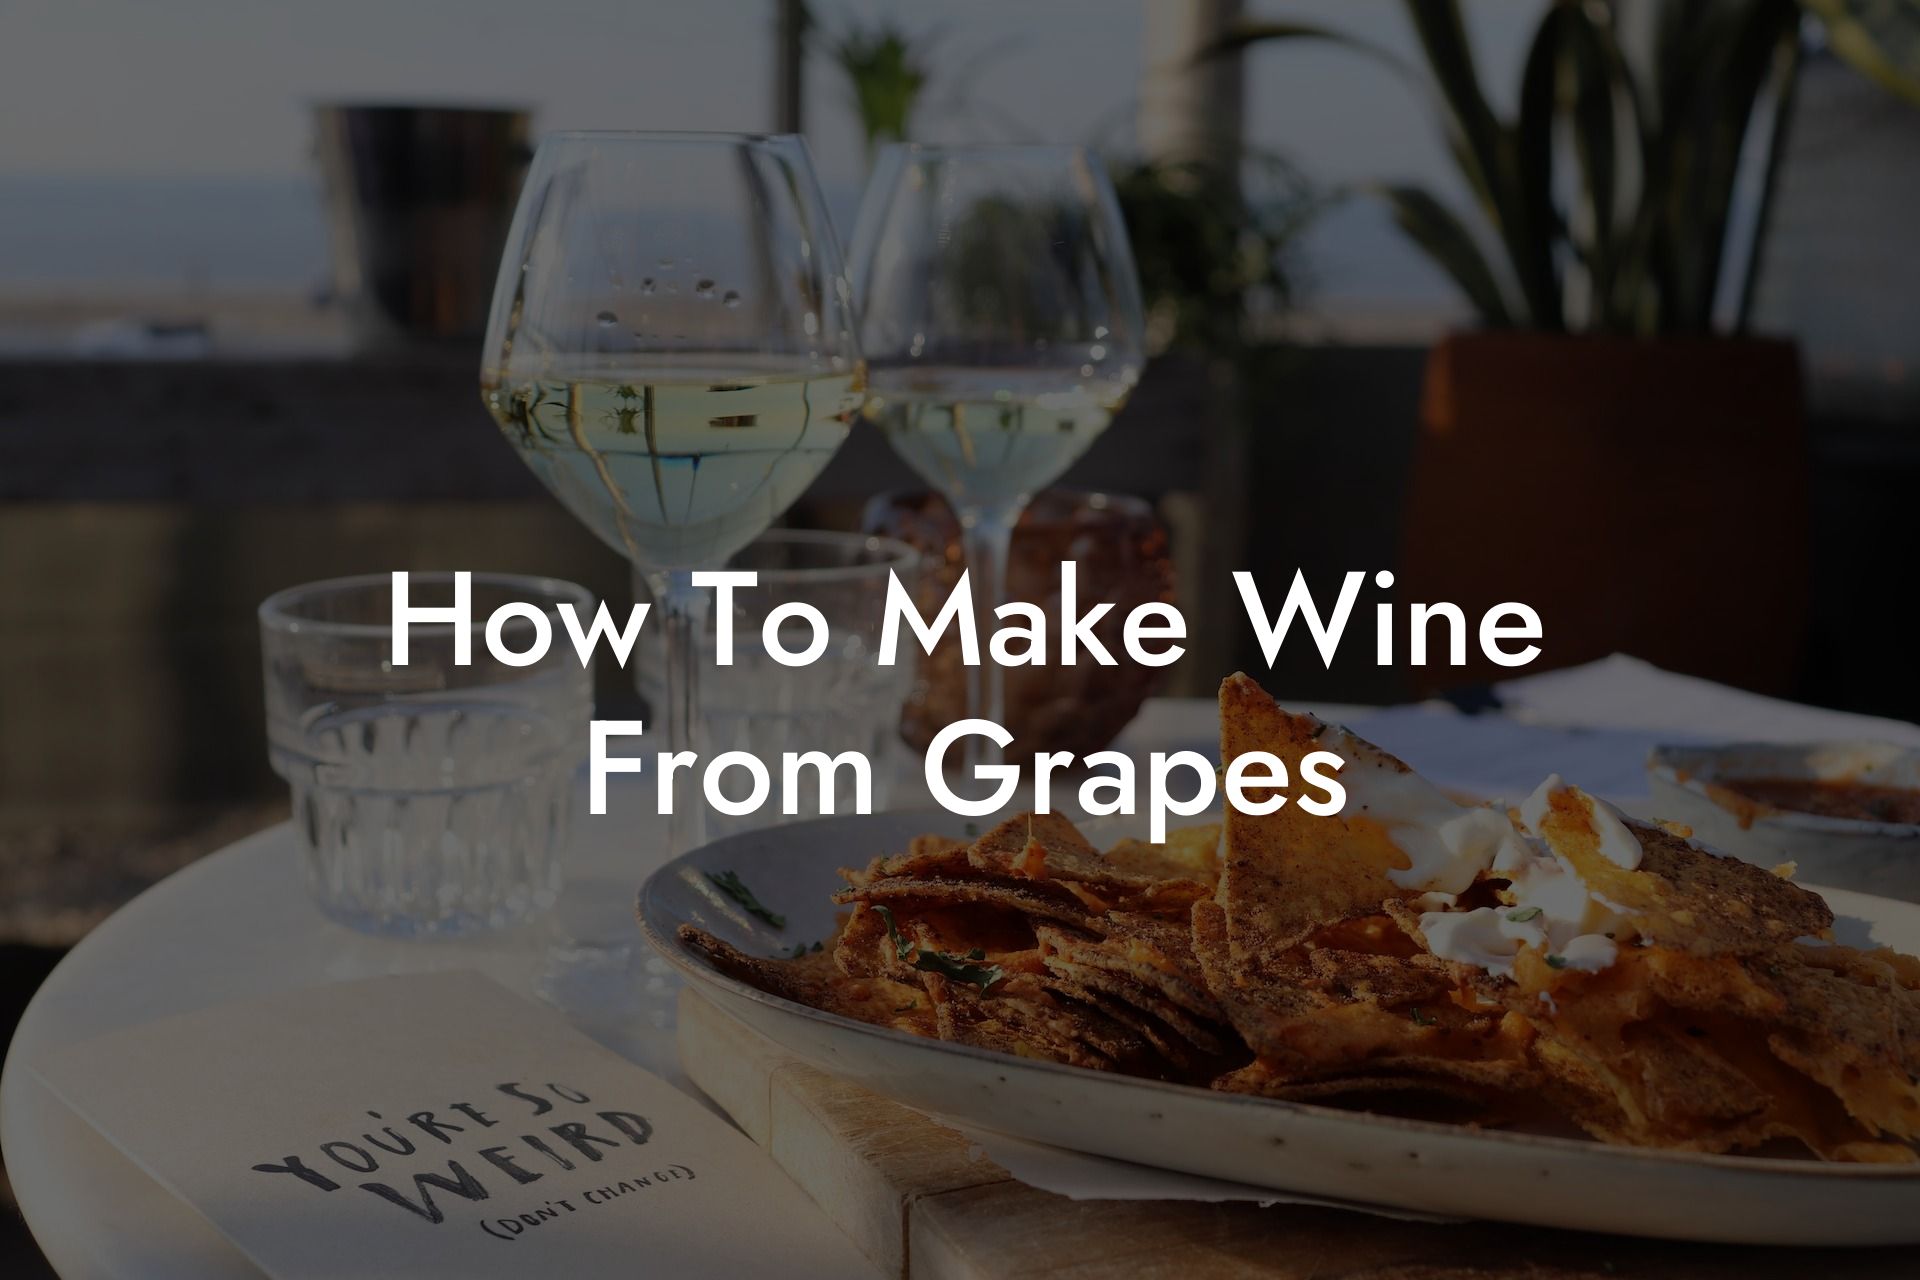 How To Make Wine From Grapes